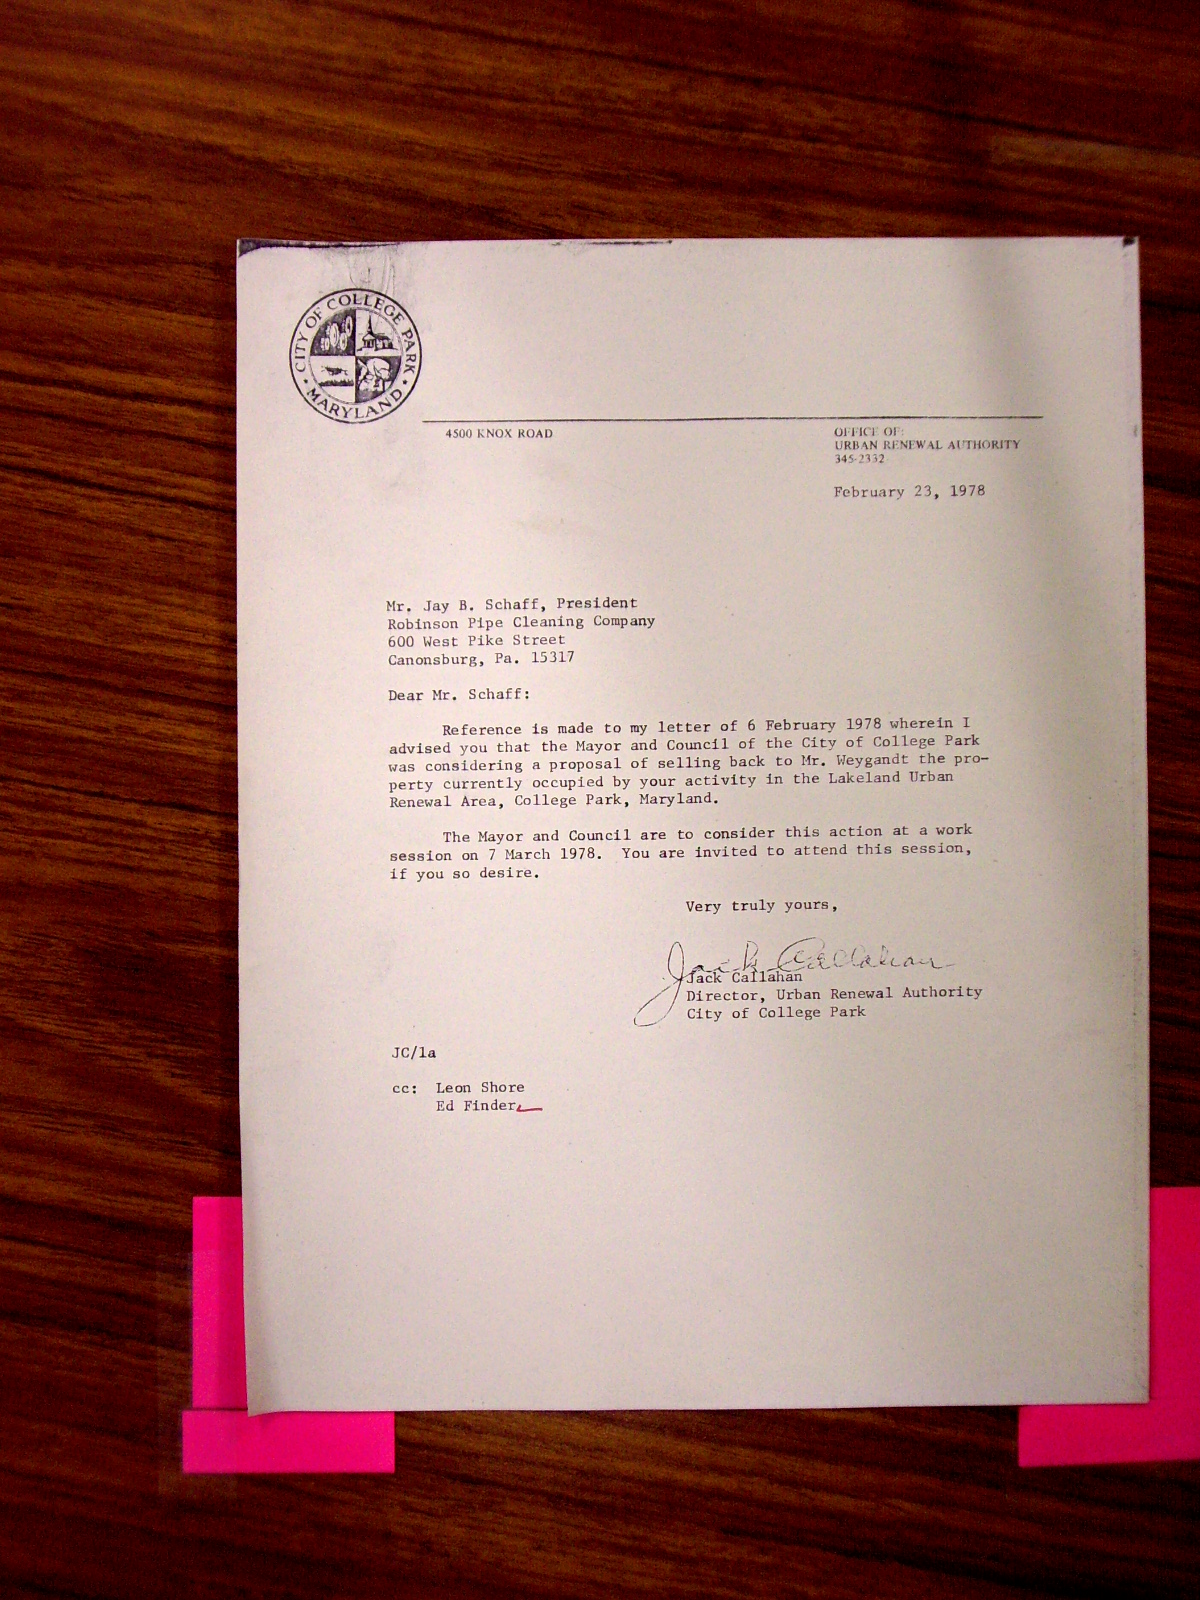 Letter from Jack Callahan to Jay Schaff, Robinson Pipe Cleaning